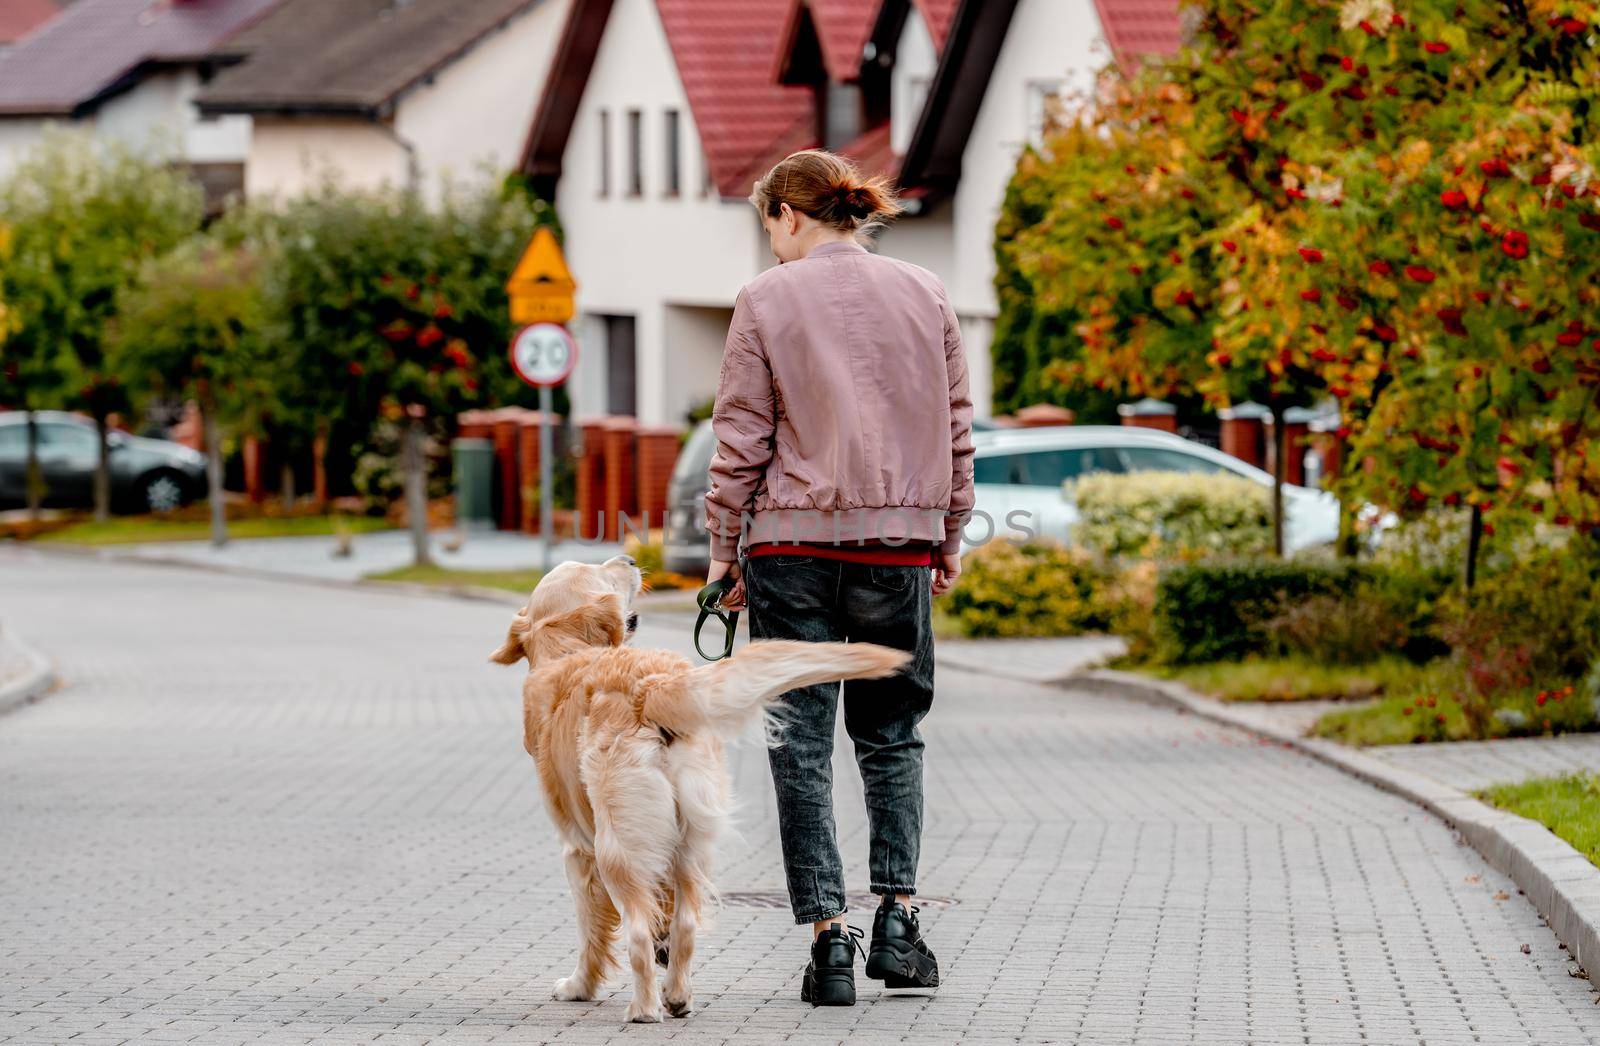 Preteen teen girl with backpack on her back with golden retriever dog walking down street . Child kid in pink jacket with purebred labrador dog outdoors